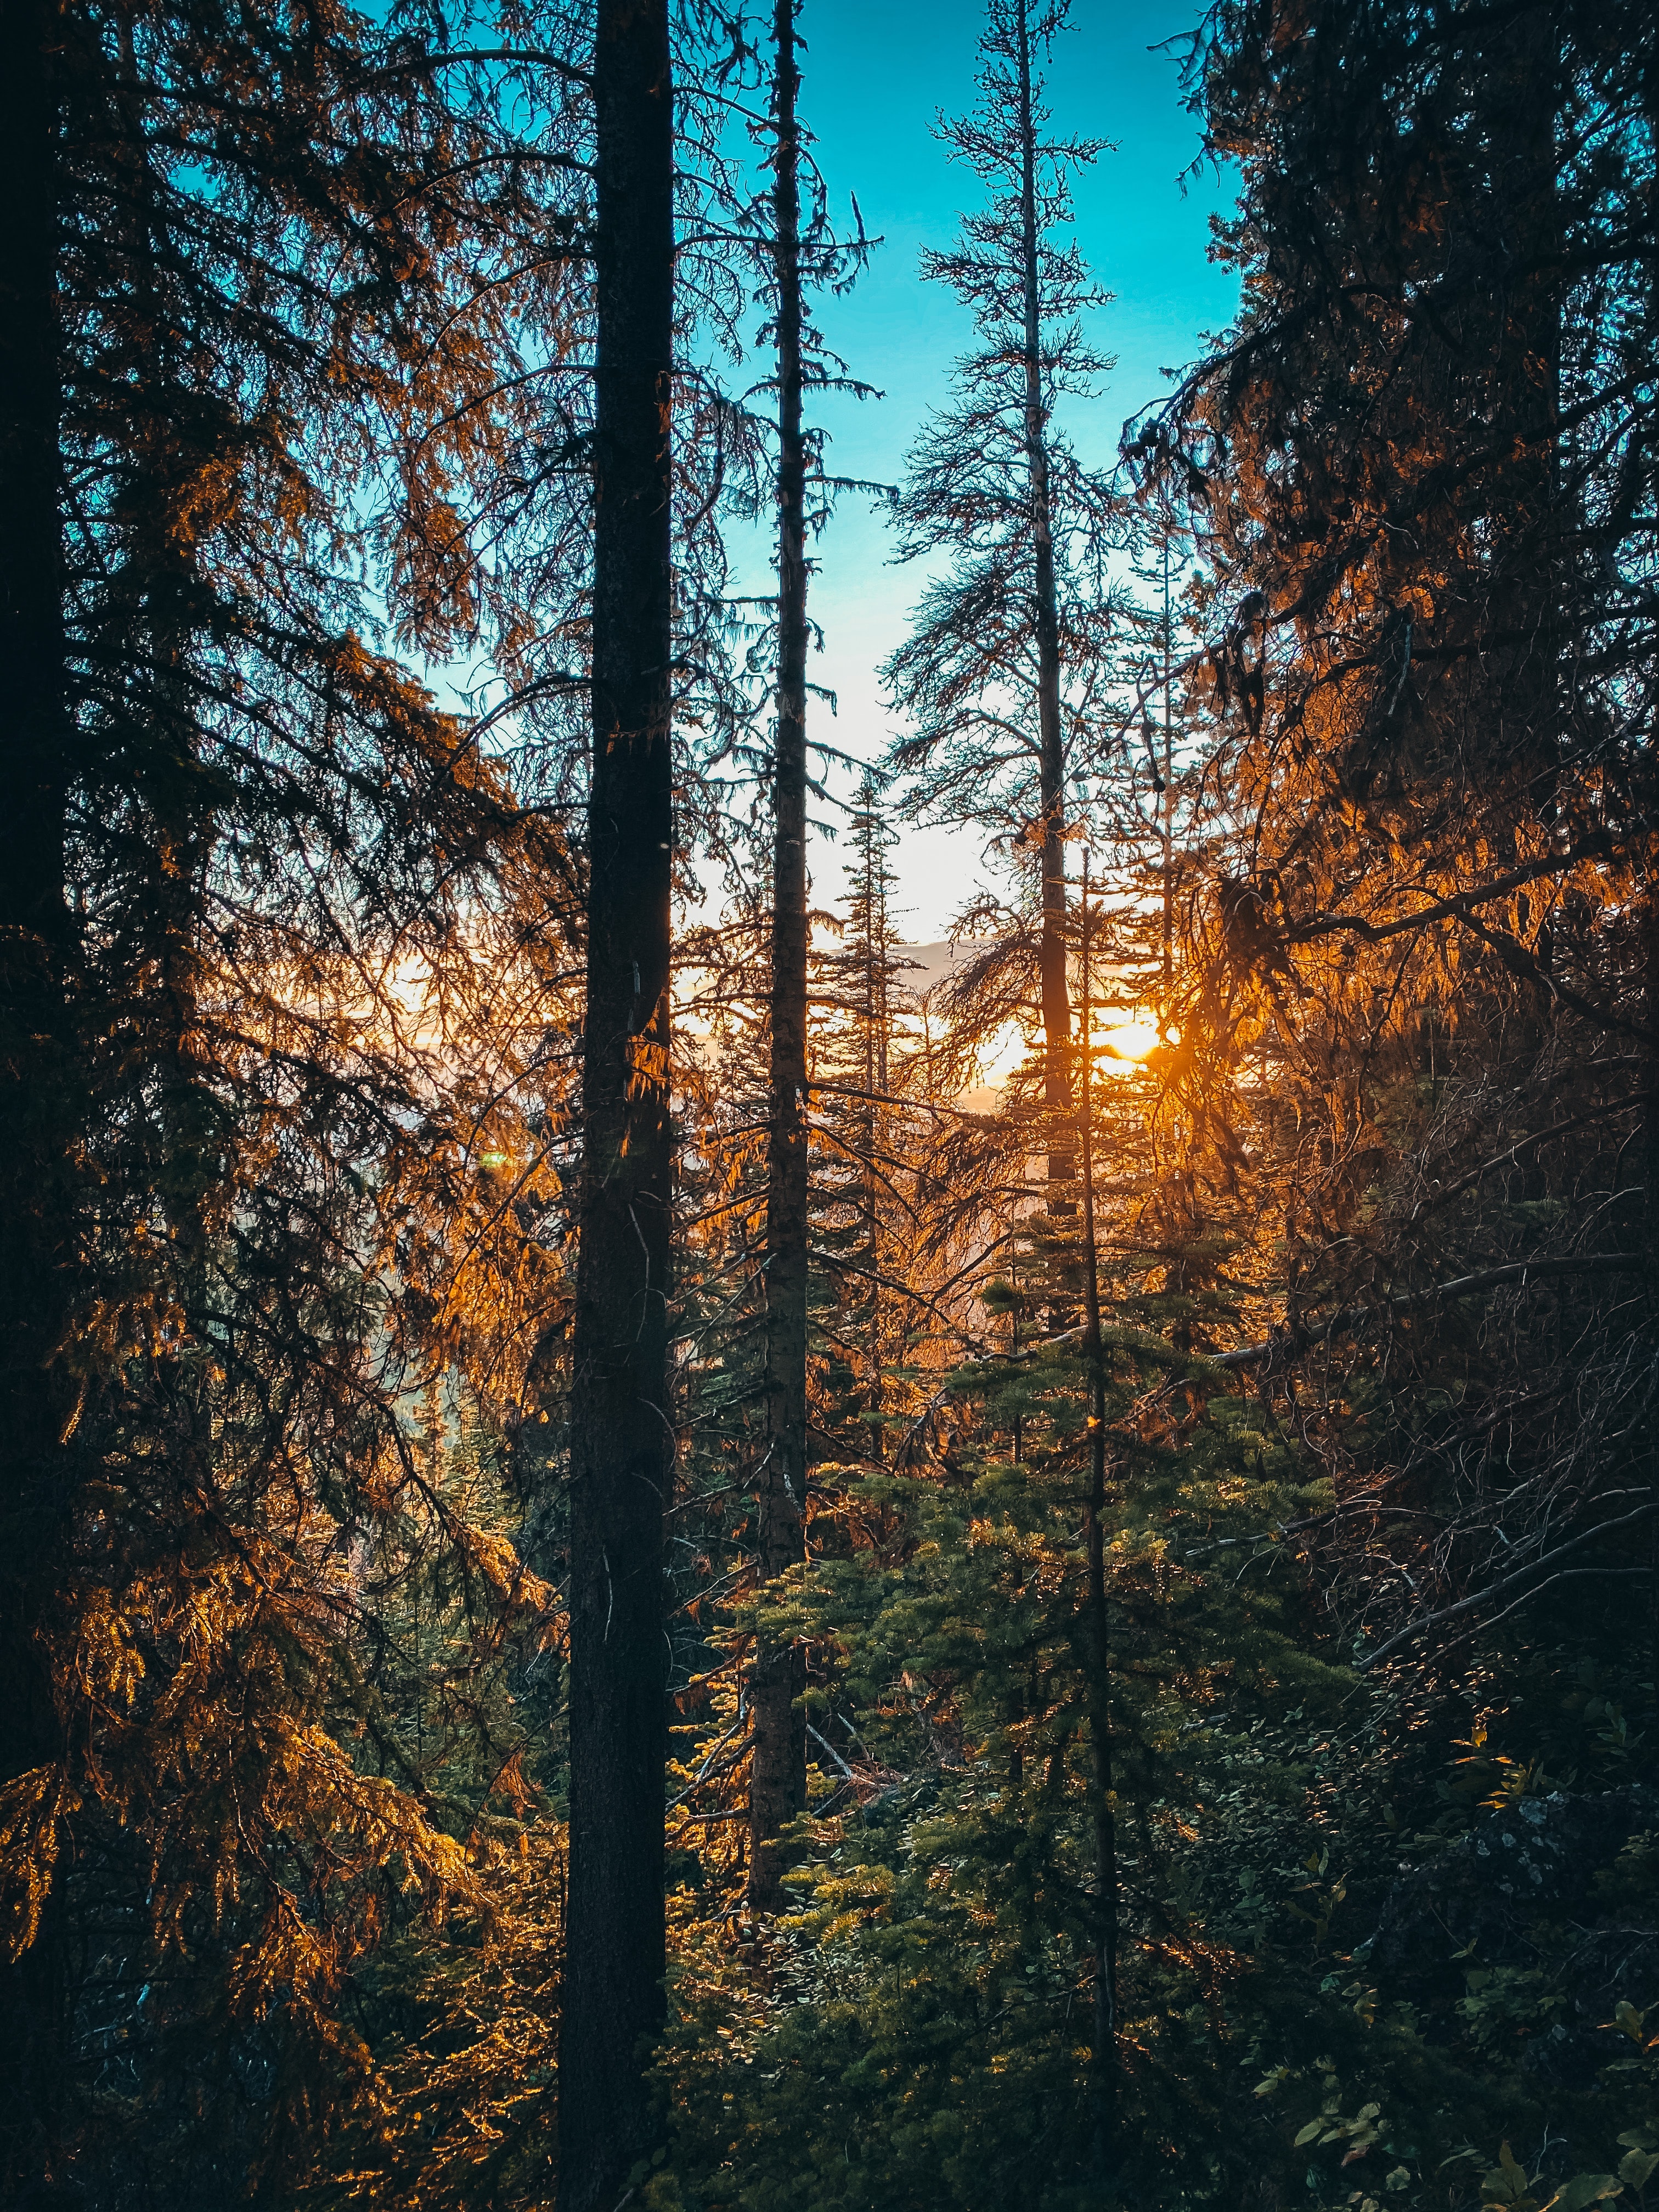 New Lock Screen Wallpapers nature, forest, sun, beams, rays, branches, spruce, fir